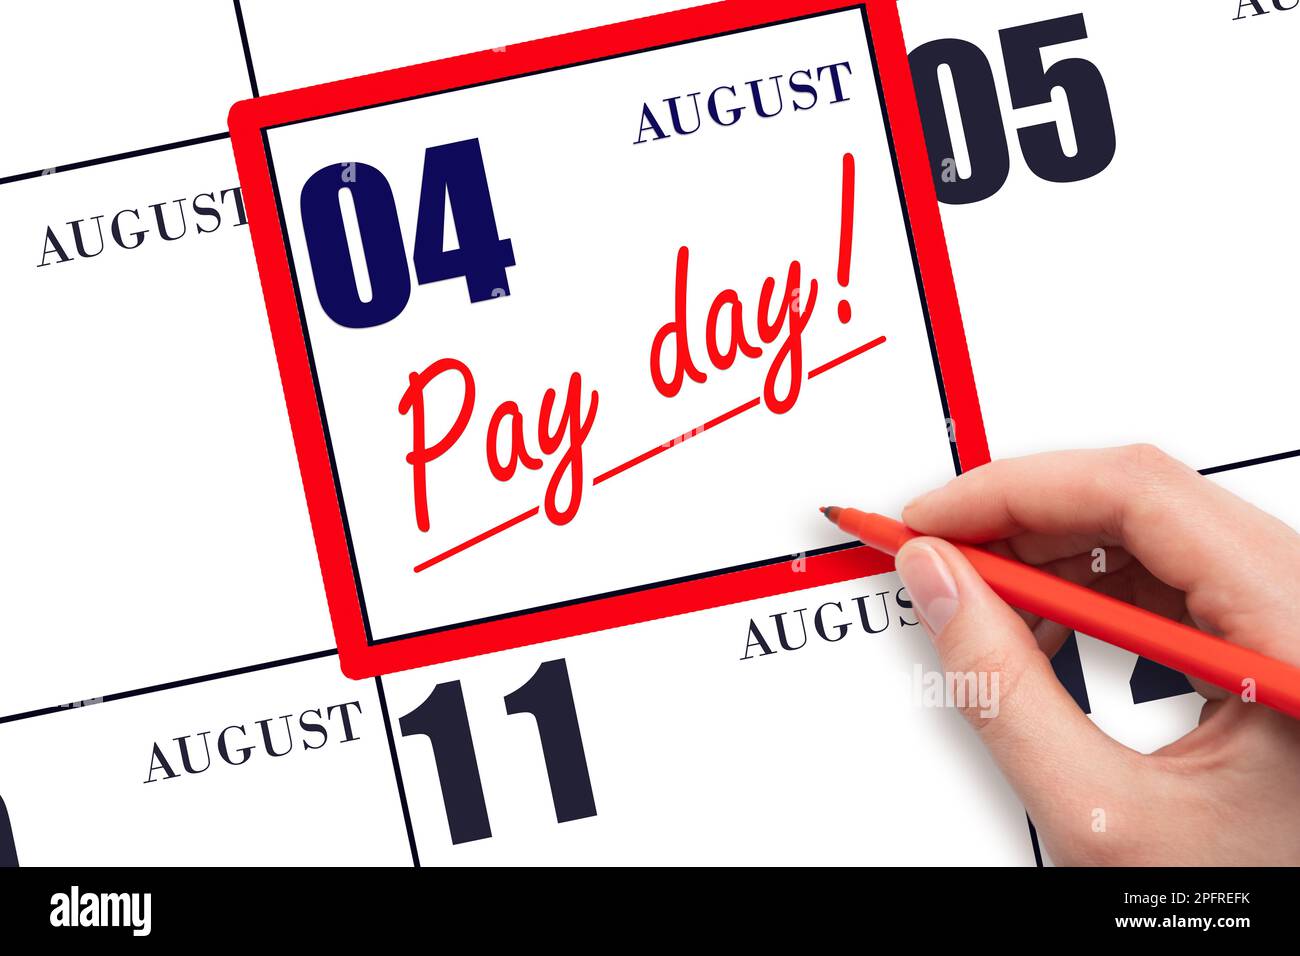 4th day of August. Hand writing text PAY DATE on calendar date August 4 and underline it. Payment due date.  Reminder concept of payment. Summer month Stock Photo